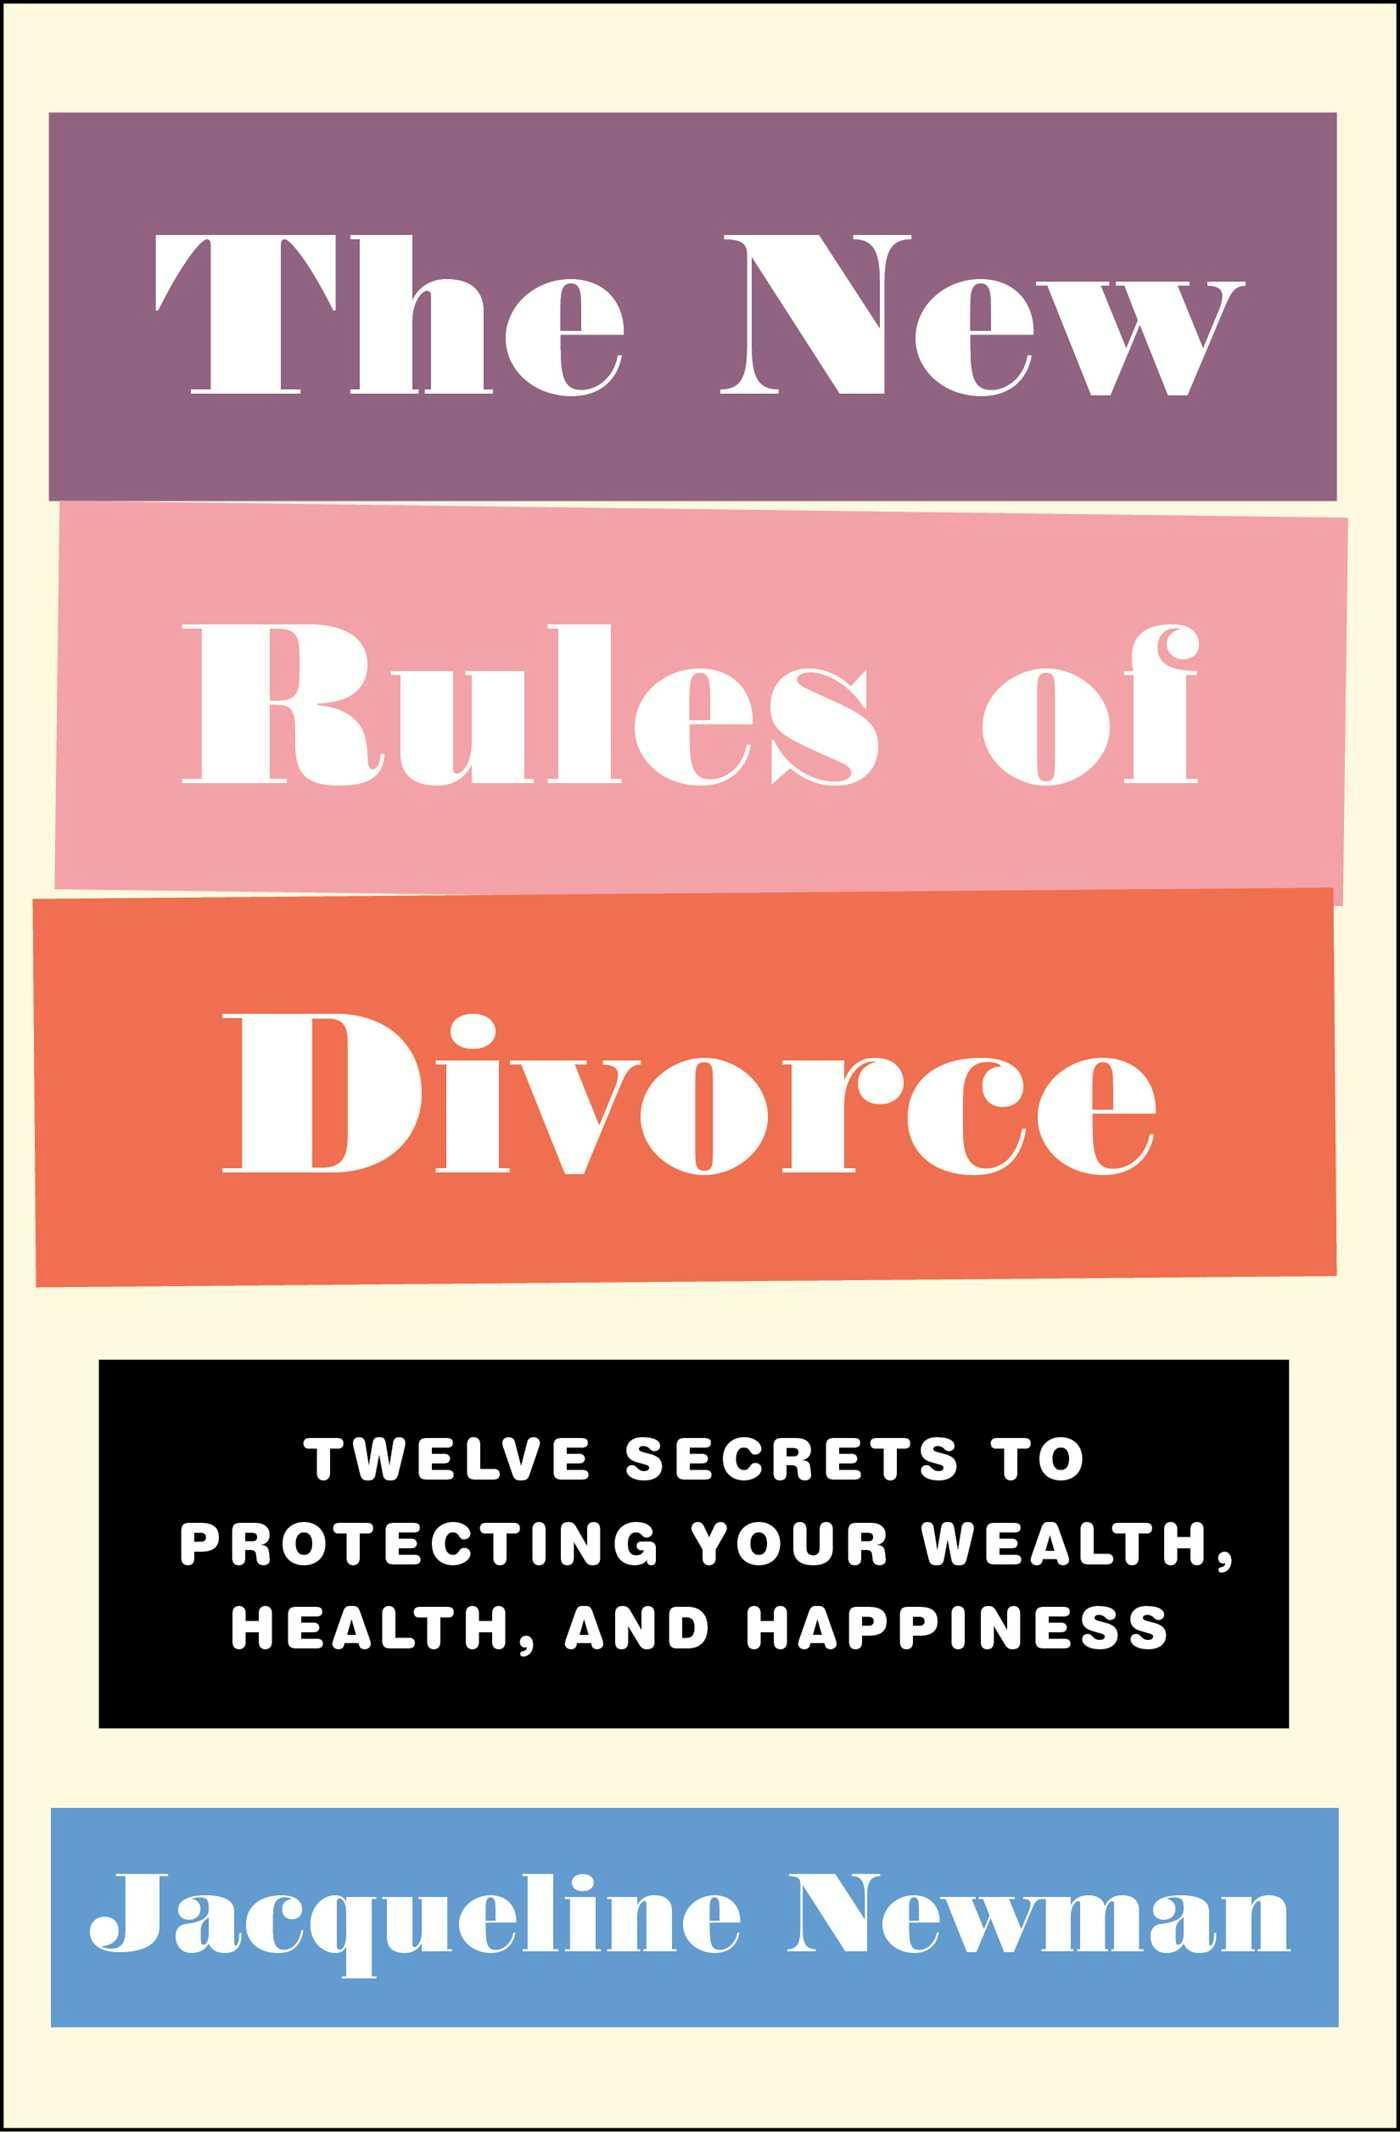 The New Rules of Divorce: Twelve Secrets to Protecting Your Wealth, Health, and Happiness - Jacqueline Newman